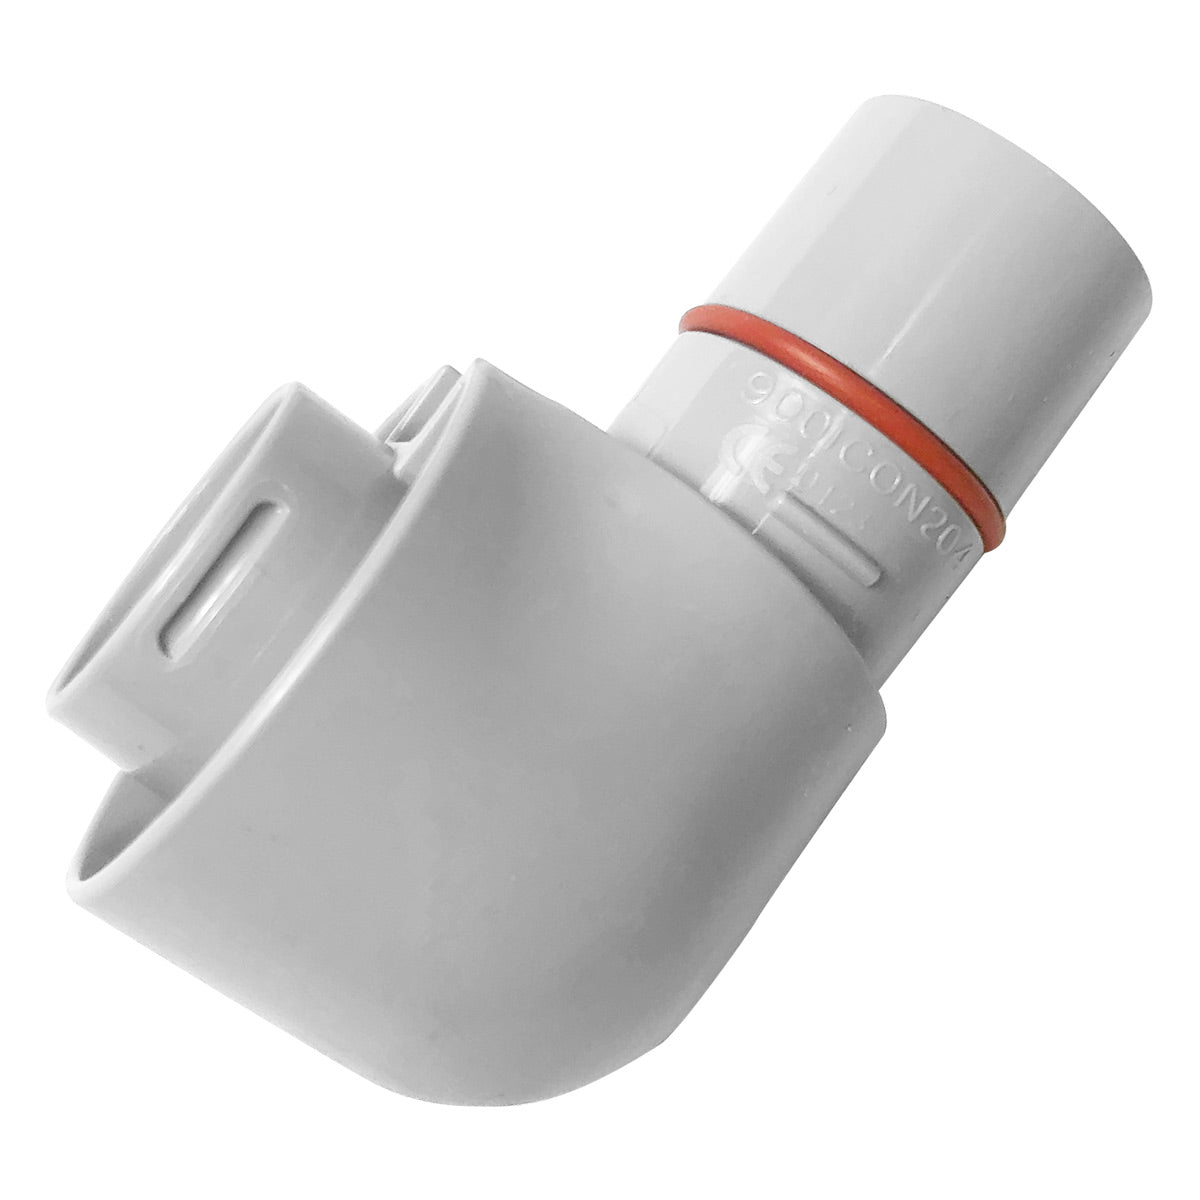 Tubing Elbow for F&P ICON Series CPAP Machines